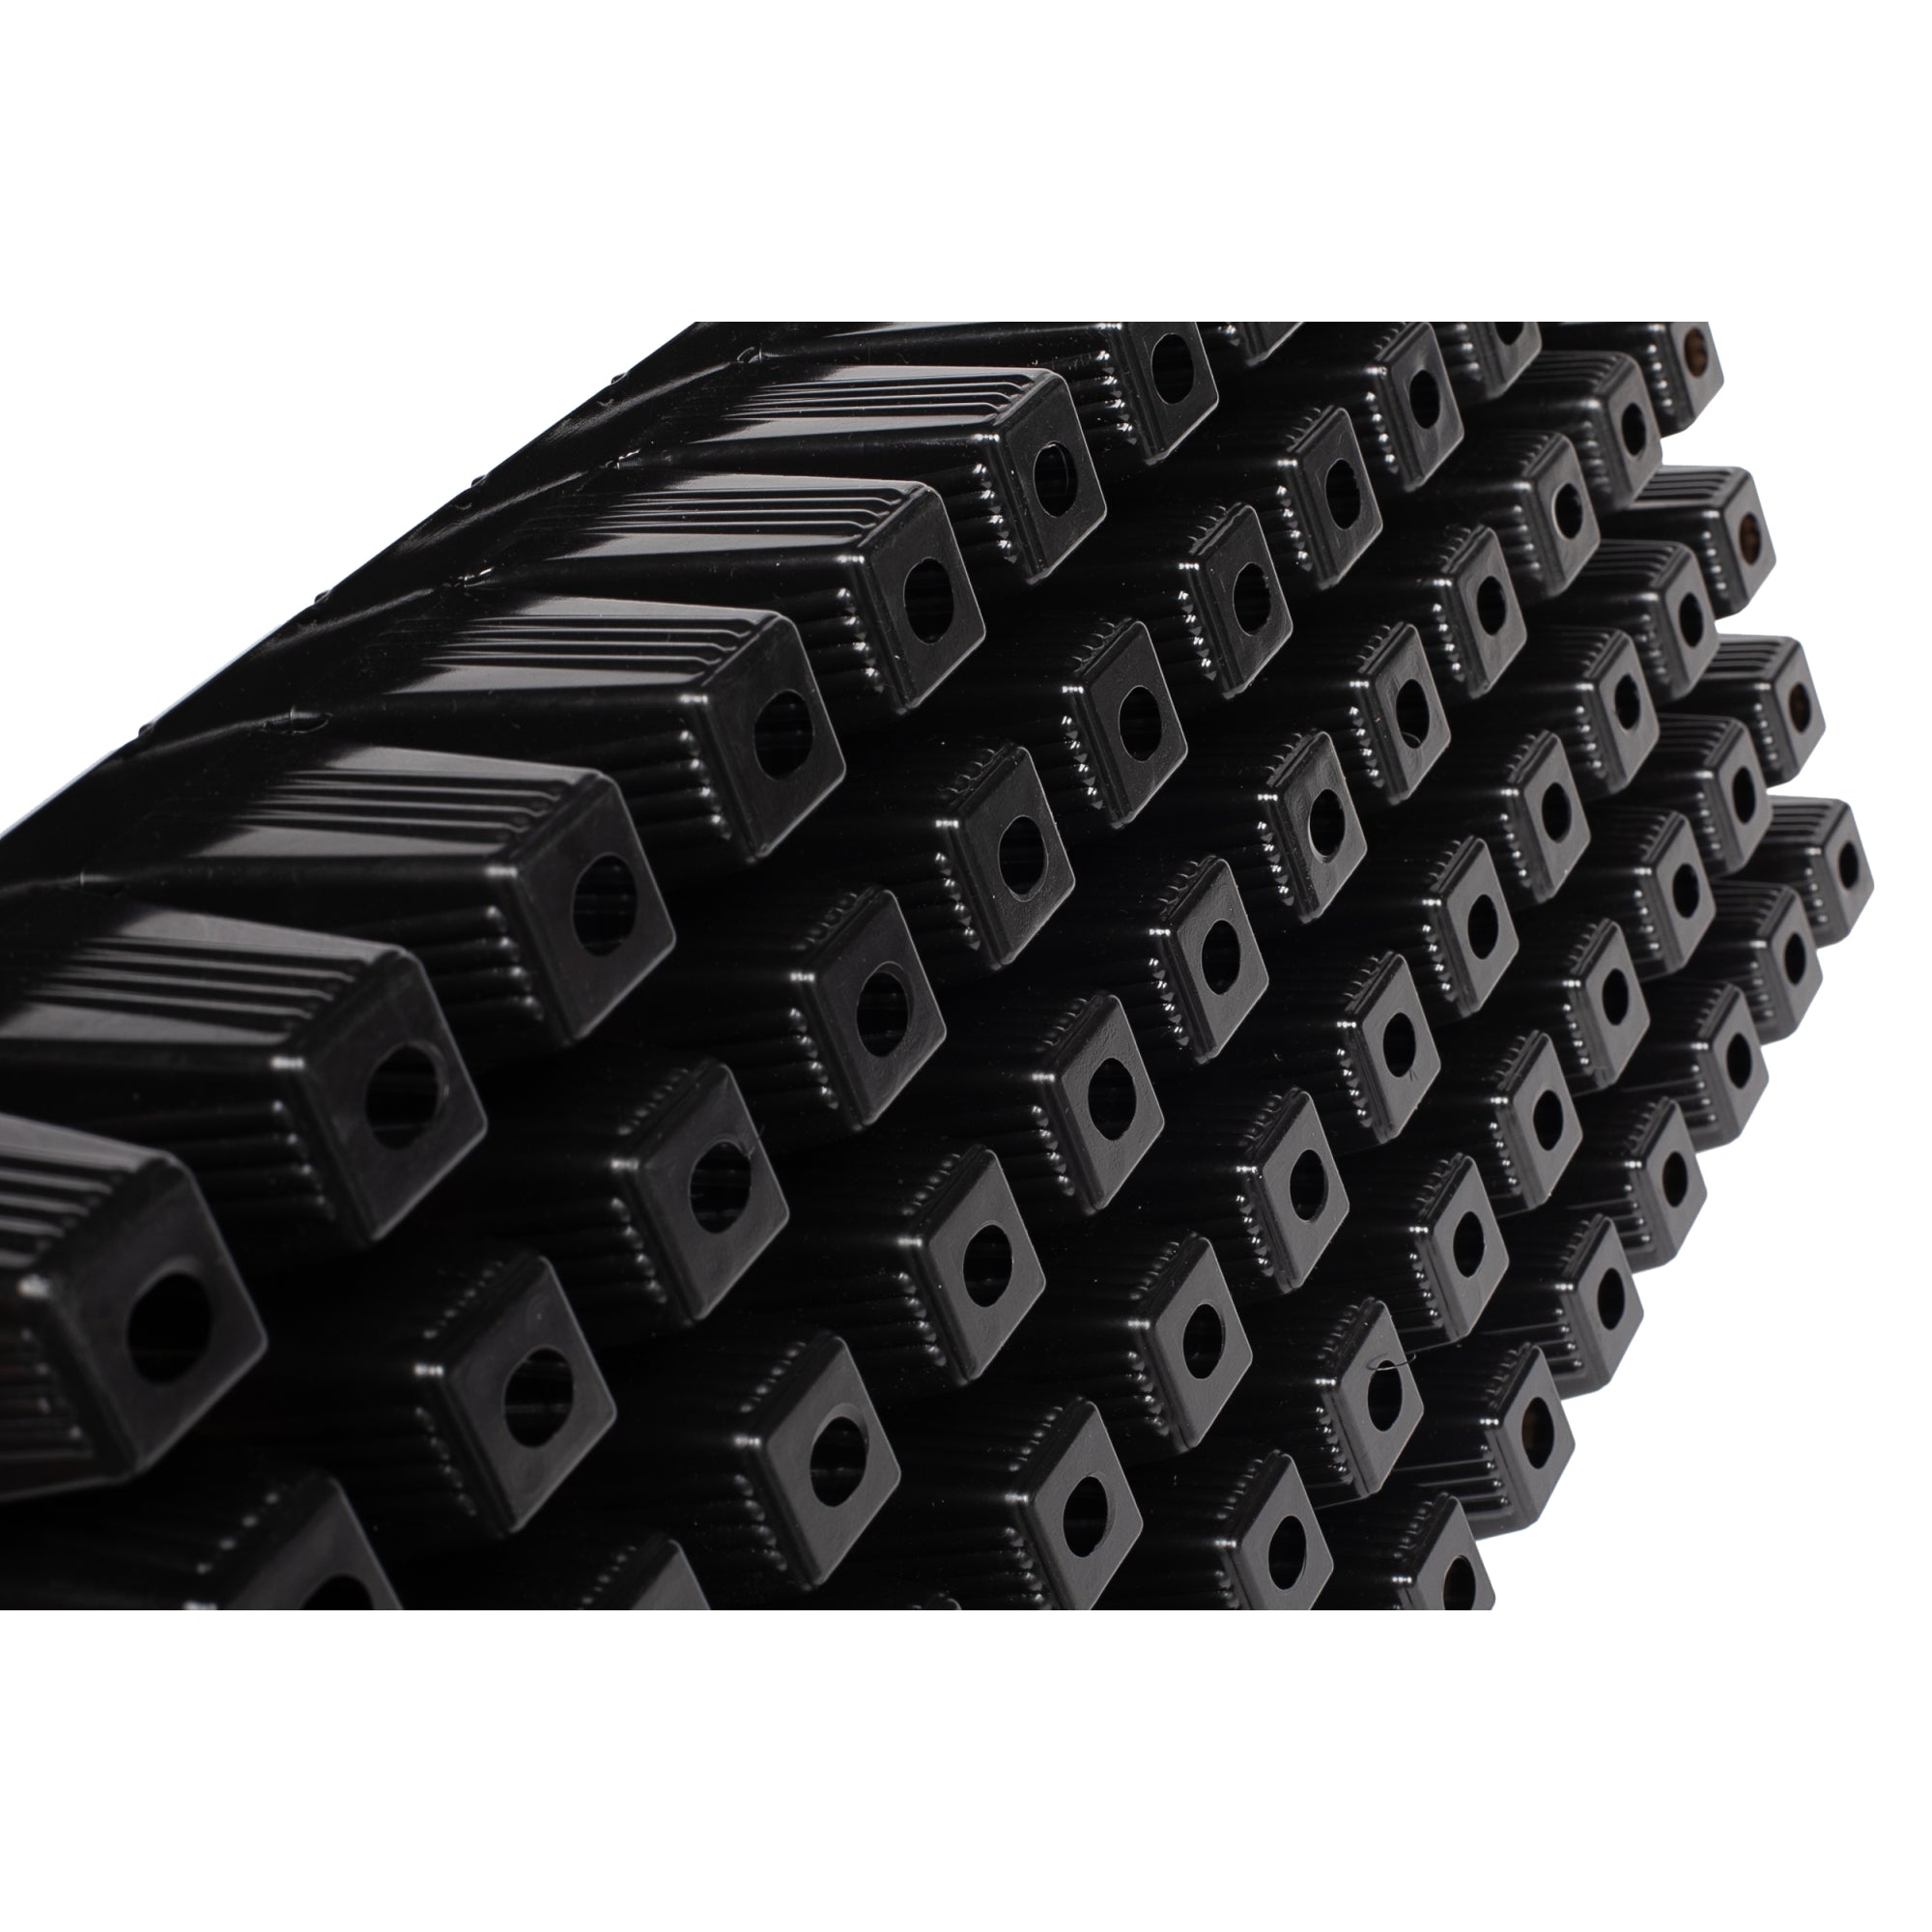 Sunpack 21"x11" 72-Cell Extra Strength Square Insert, for Greenhouses, Gardening, and Seedlings, Black, Fits 10"x20" Trays